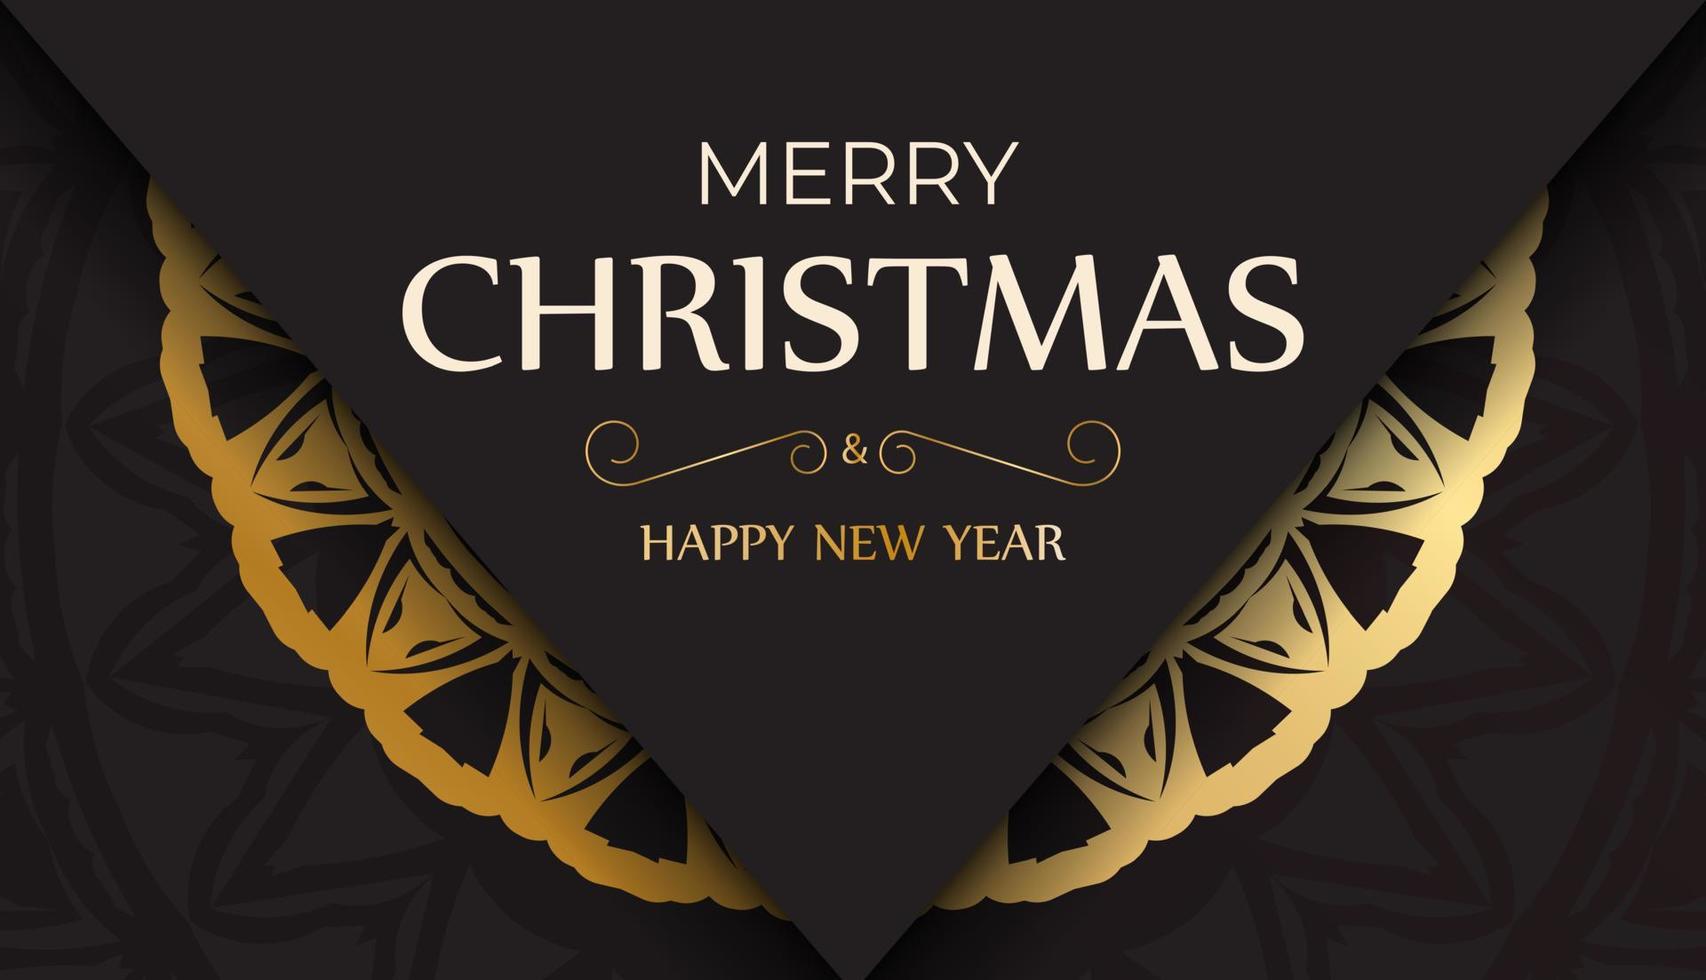 Greeting Card Merry Christmas and Happy New Year in black color with gold pattern. vector